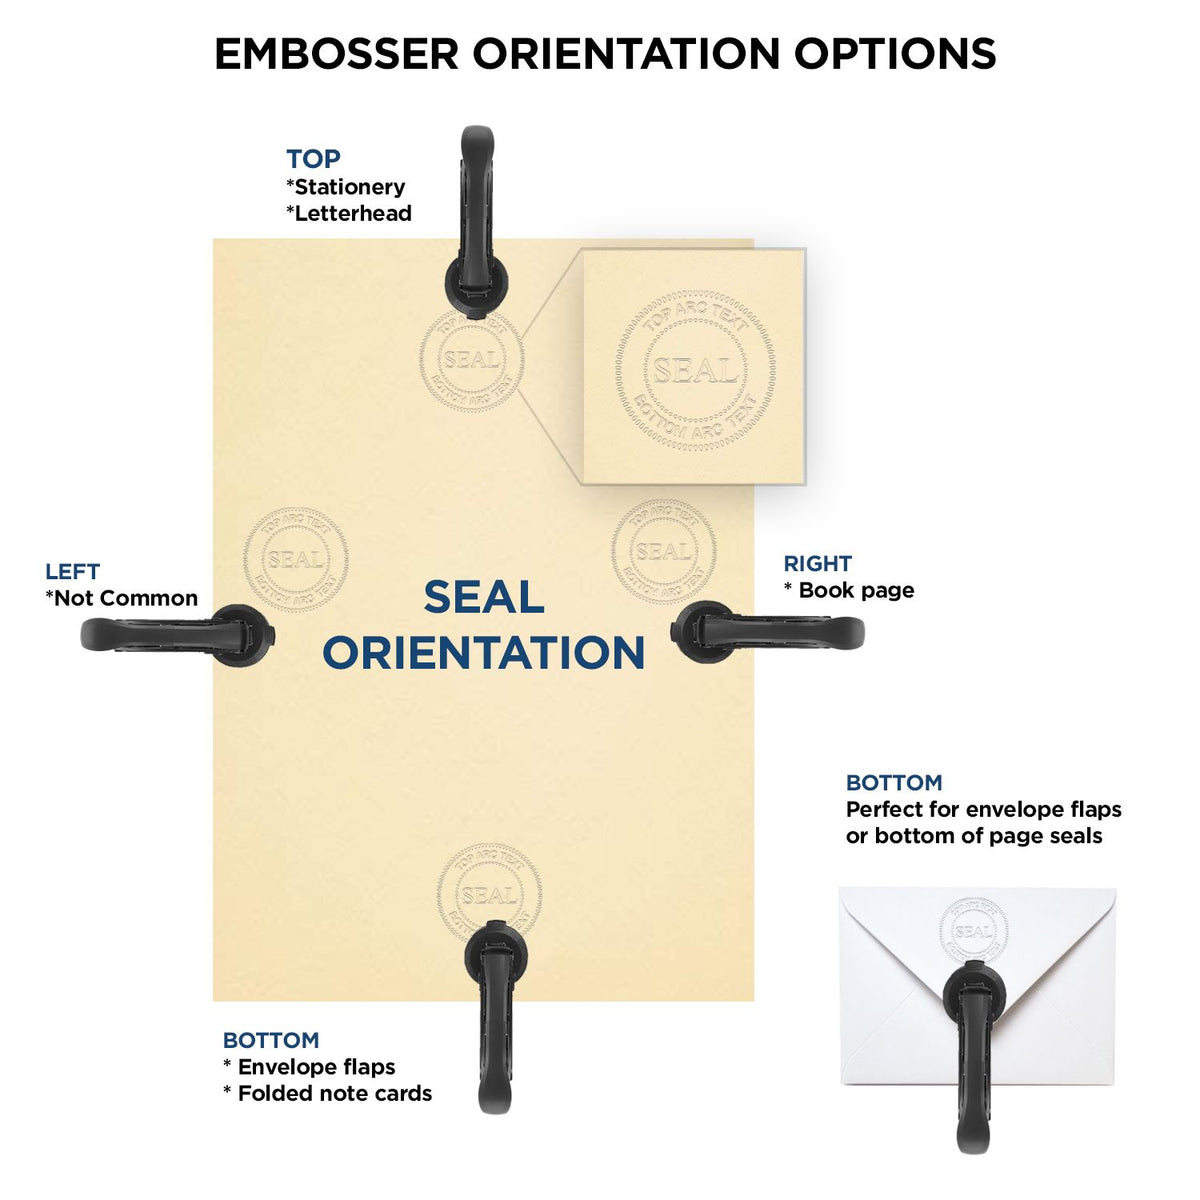 An infographic for the Heavy Duty Cast Iron Arizona Engineer Seal Embosser showing embosser orientation, this is showing examples of a top, bottom, right and left insert.